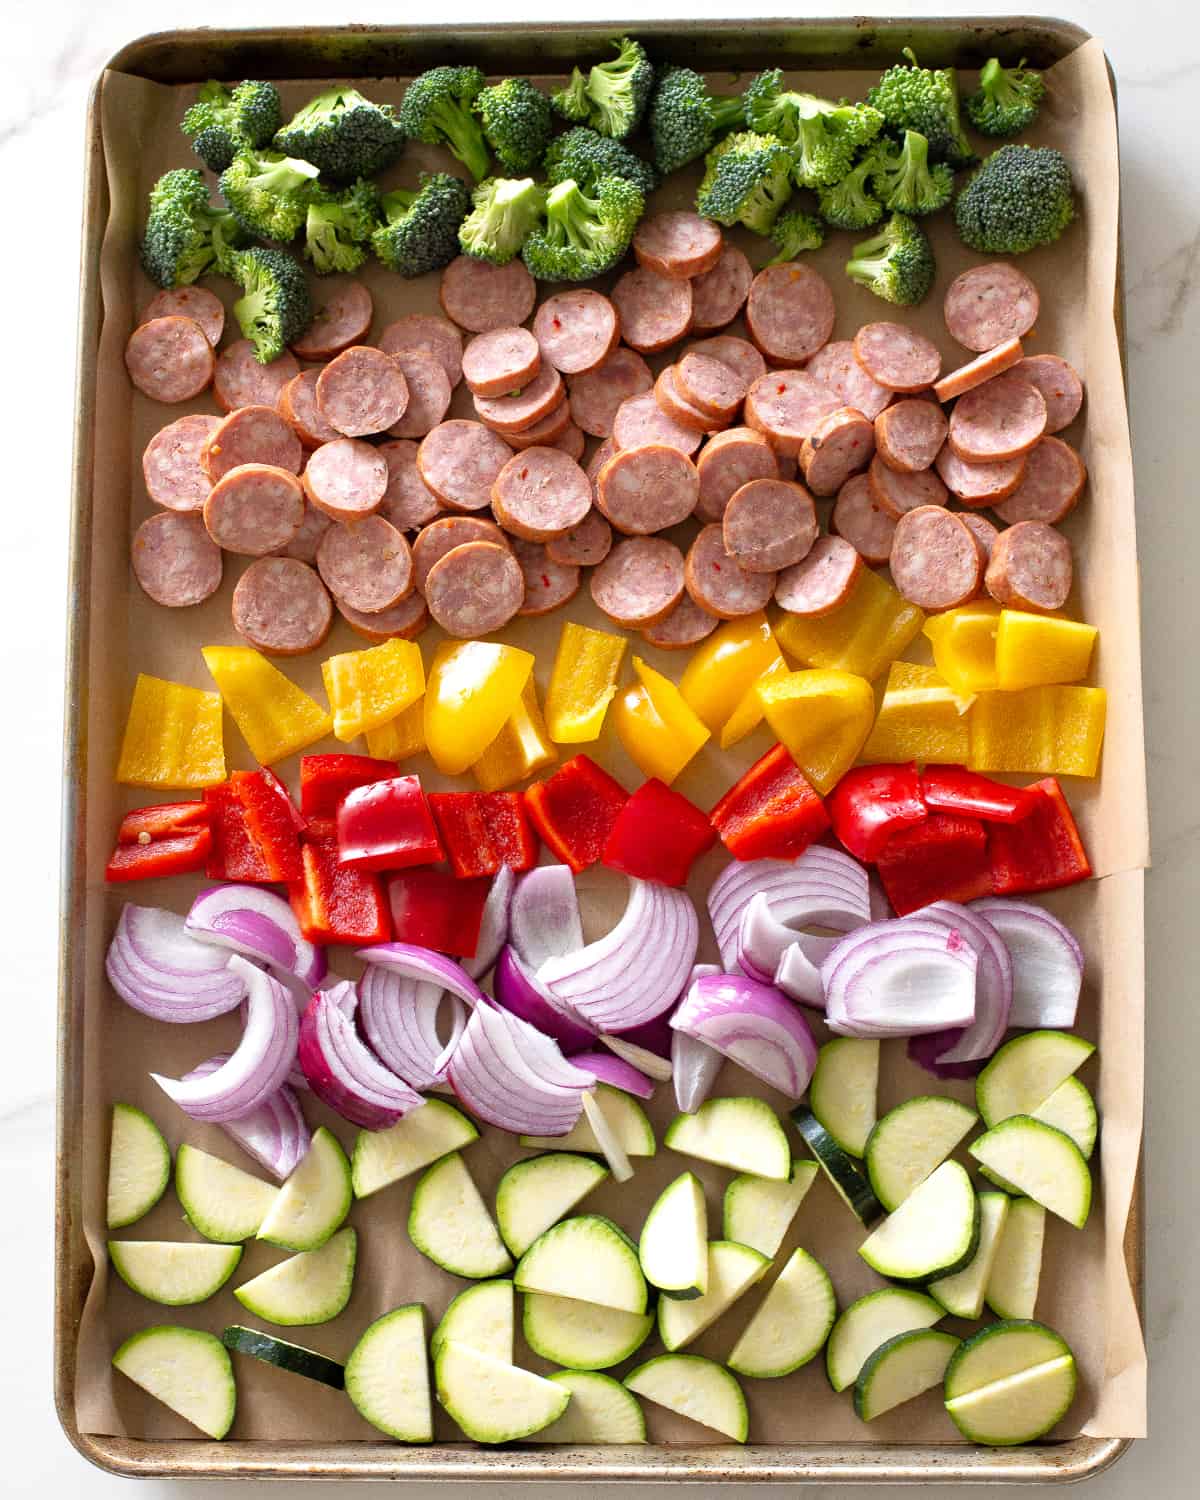 Sheet Pan Chicken Sausage and Veggies - All the Healthy Things